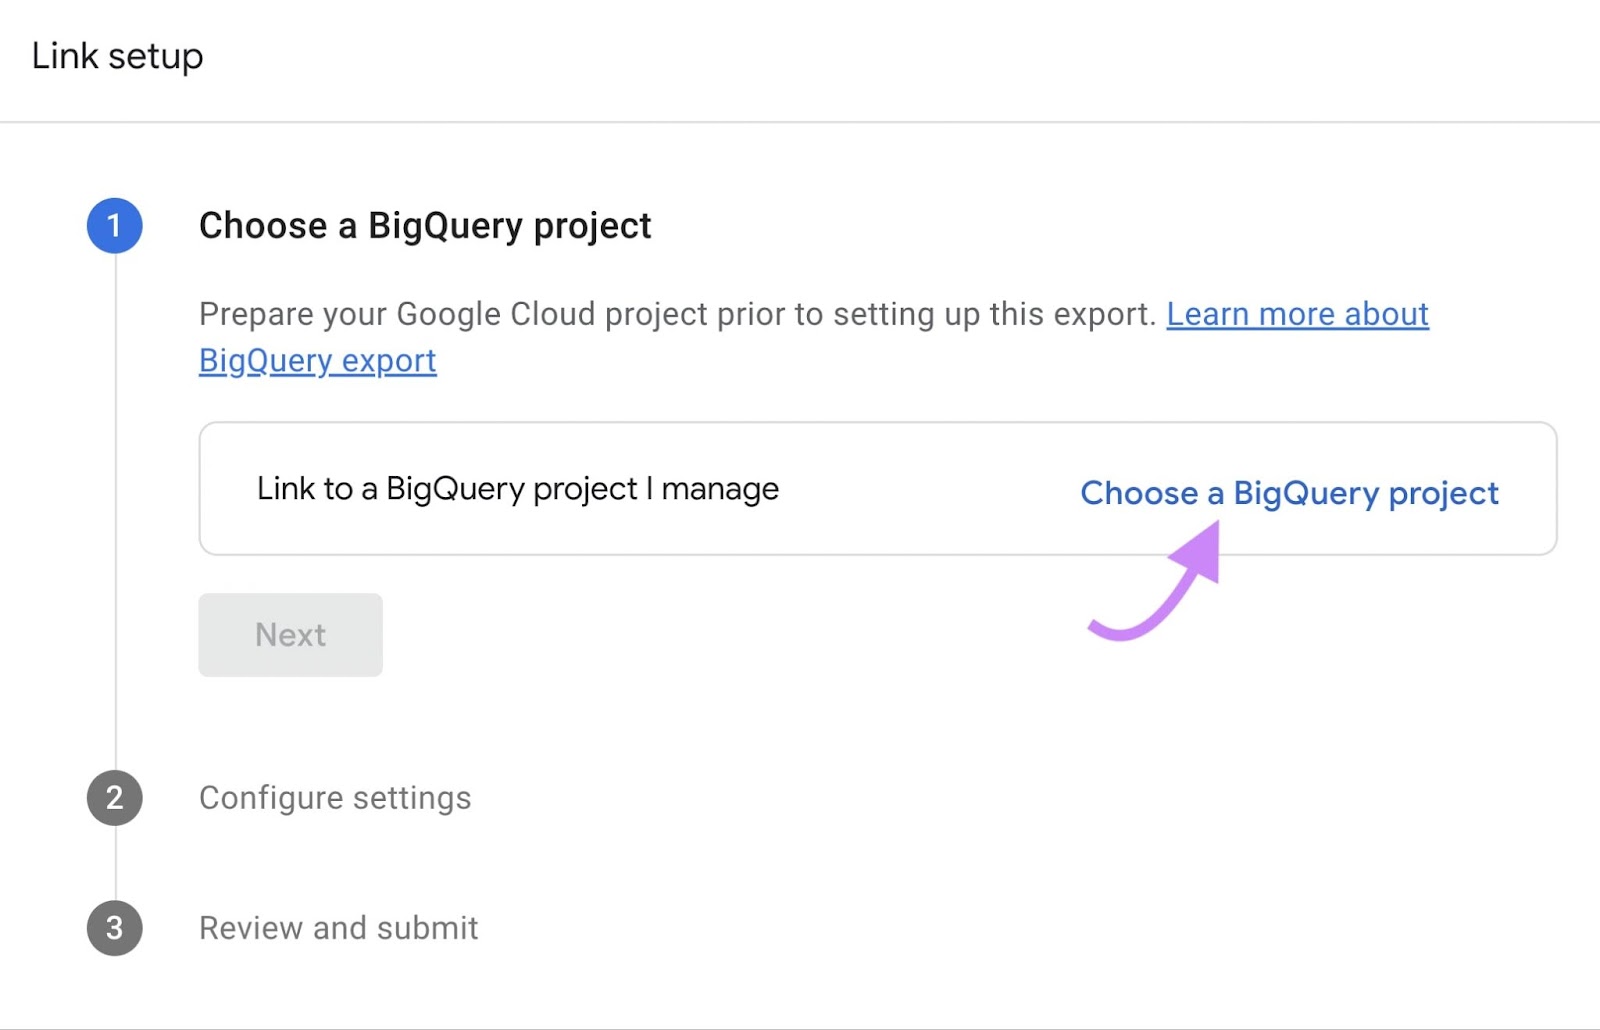 “Choose a BigQuery project" selected under "Link setup" section